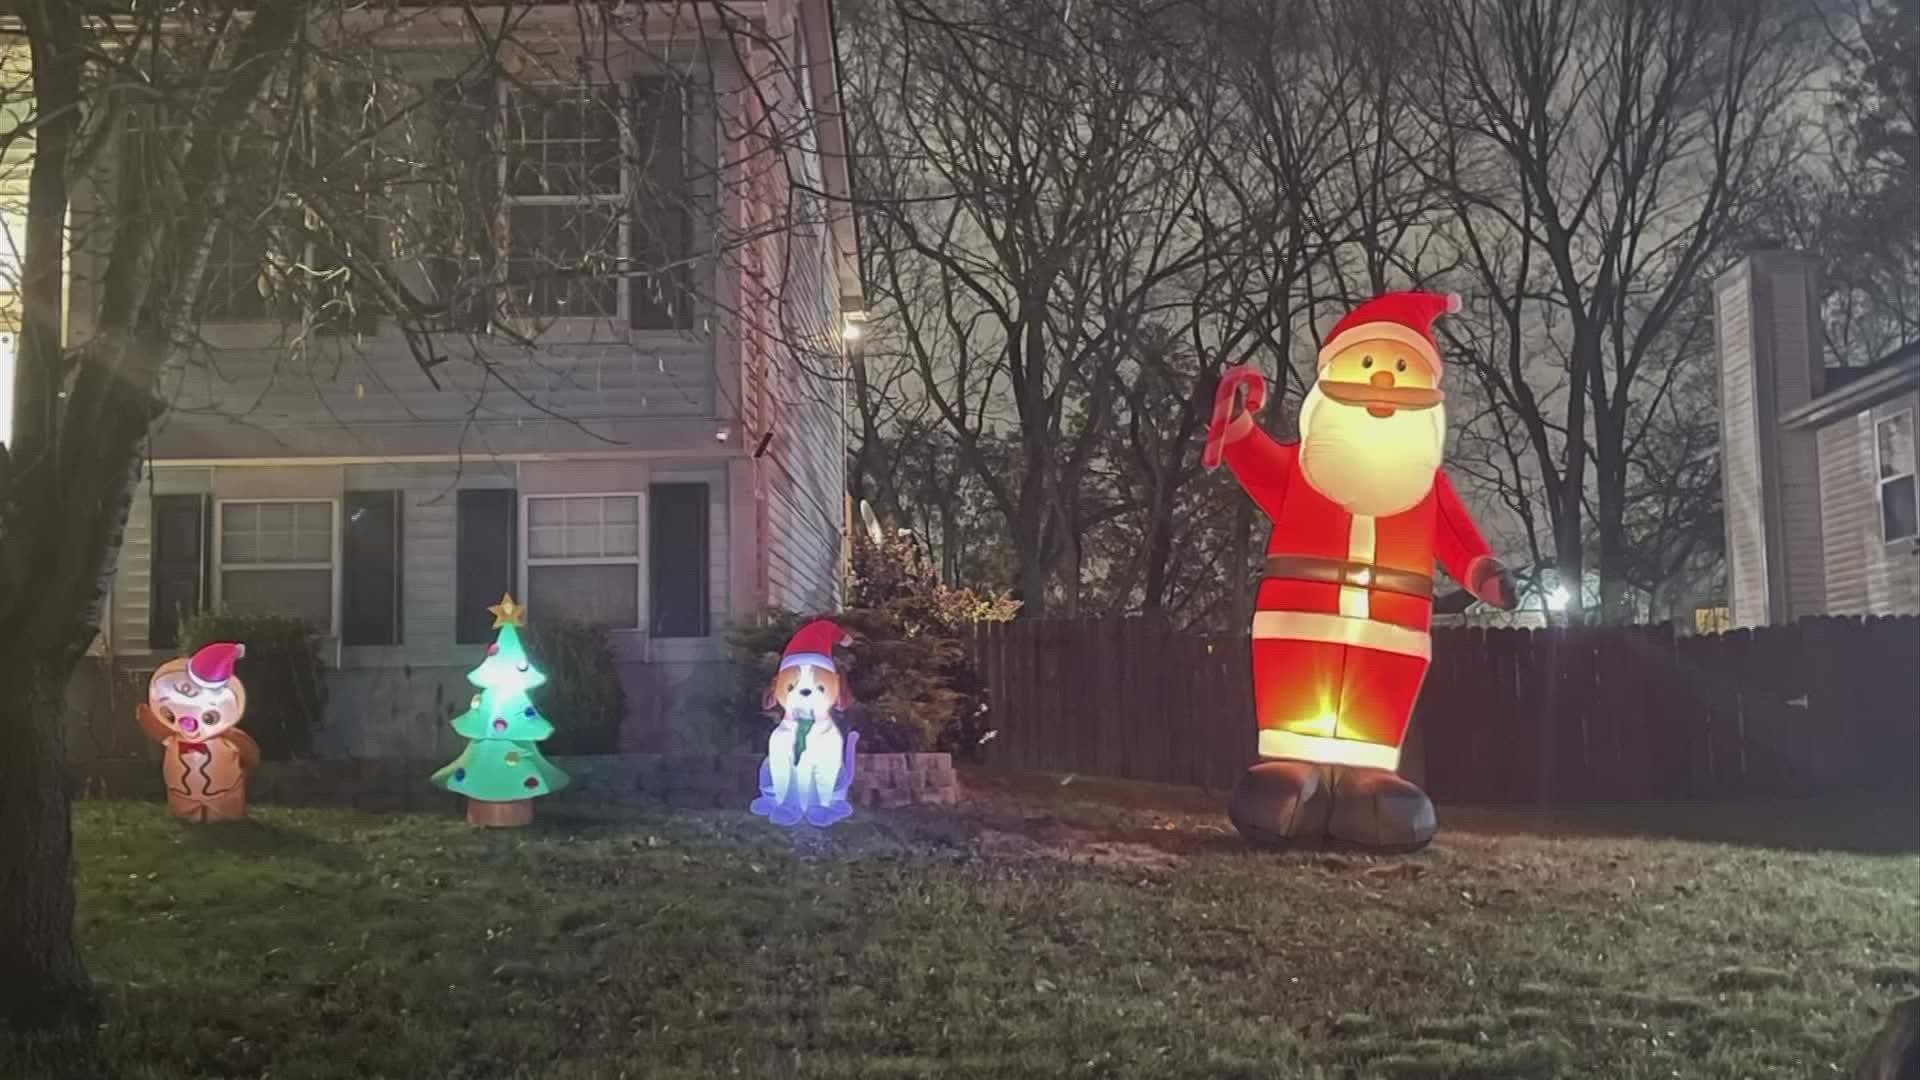 Police agencies around central Ohio say every year they see vandalism or theft of Christmas decorations.